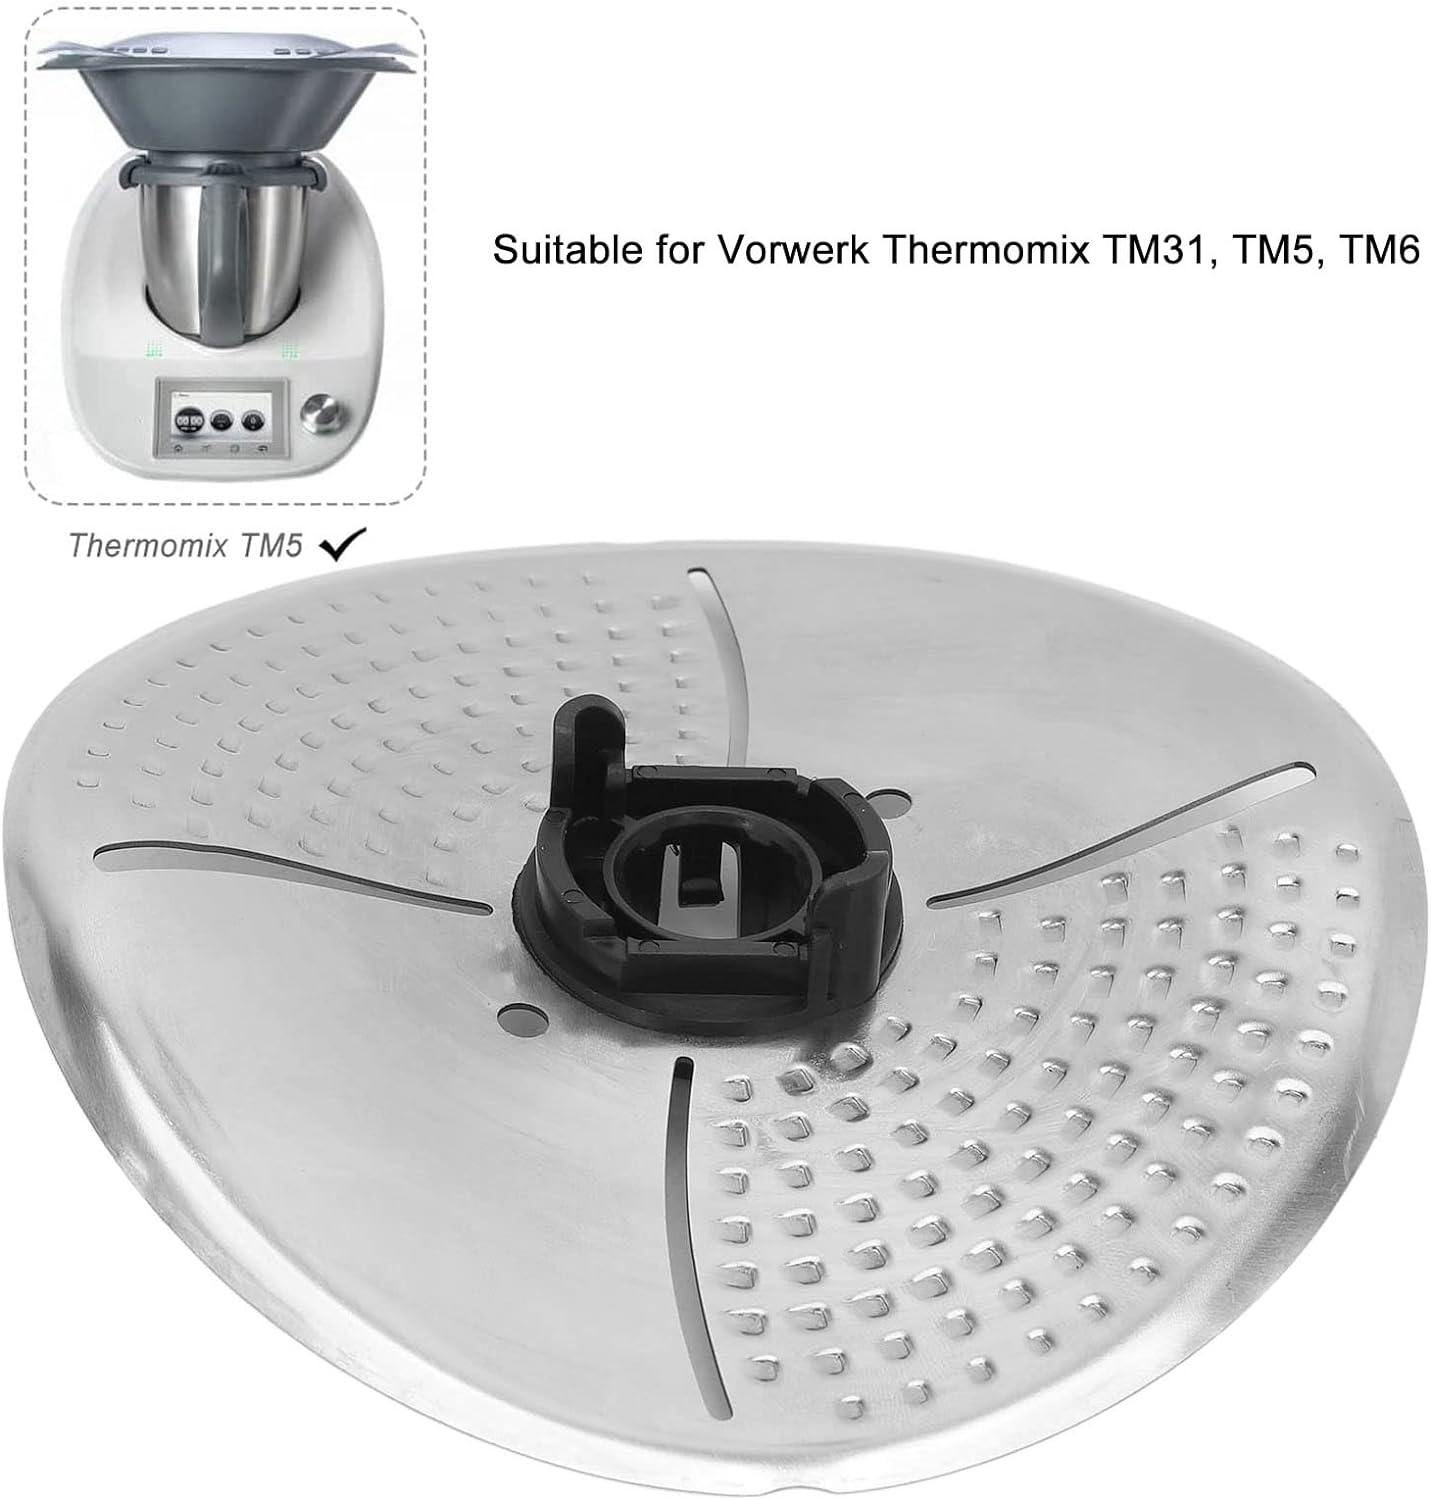 Thermomix Tm6 Accessories,Replacement Blade Protective Cove, Food Class Protector Stainless Steel Cooking Machine Blade Cover for Vorwerk Thermomix TM6 TM5 TM31Accessries,5.7x5.5x1.2in